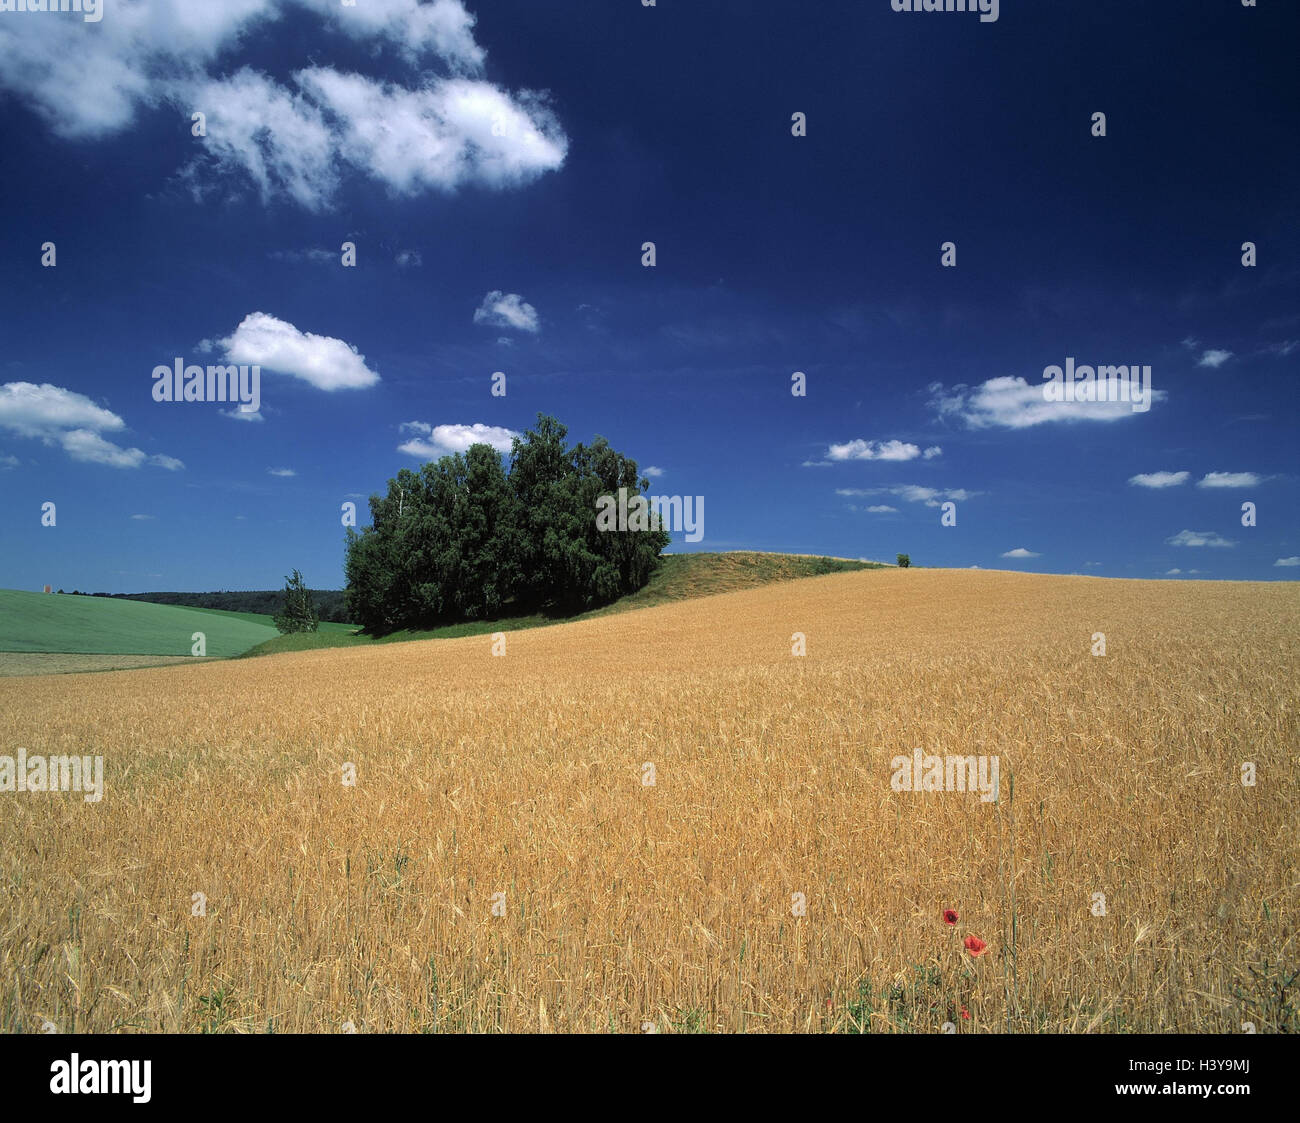 Grain-field, barley, Hordeum spec., grass, ears, grain, agriculture, country living, cultivated plant Stock Photo